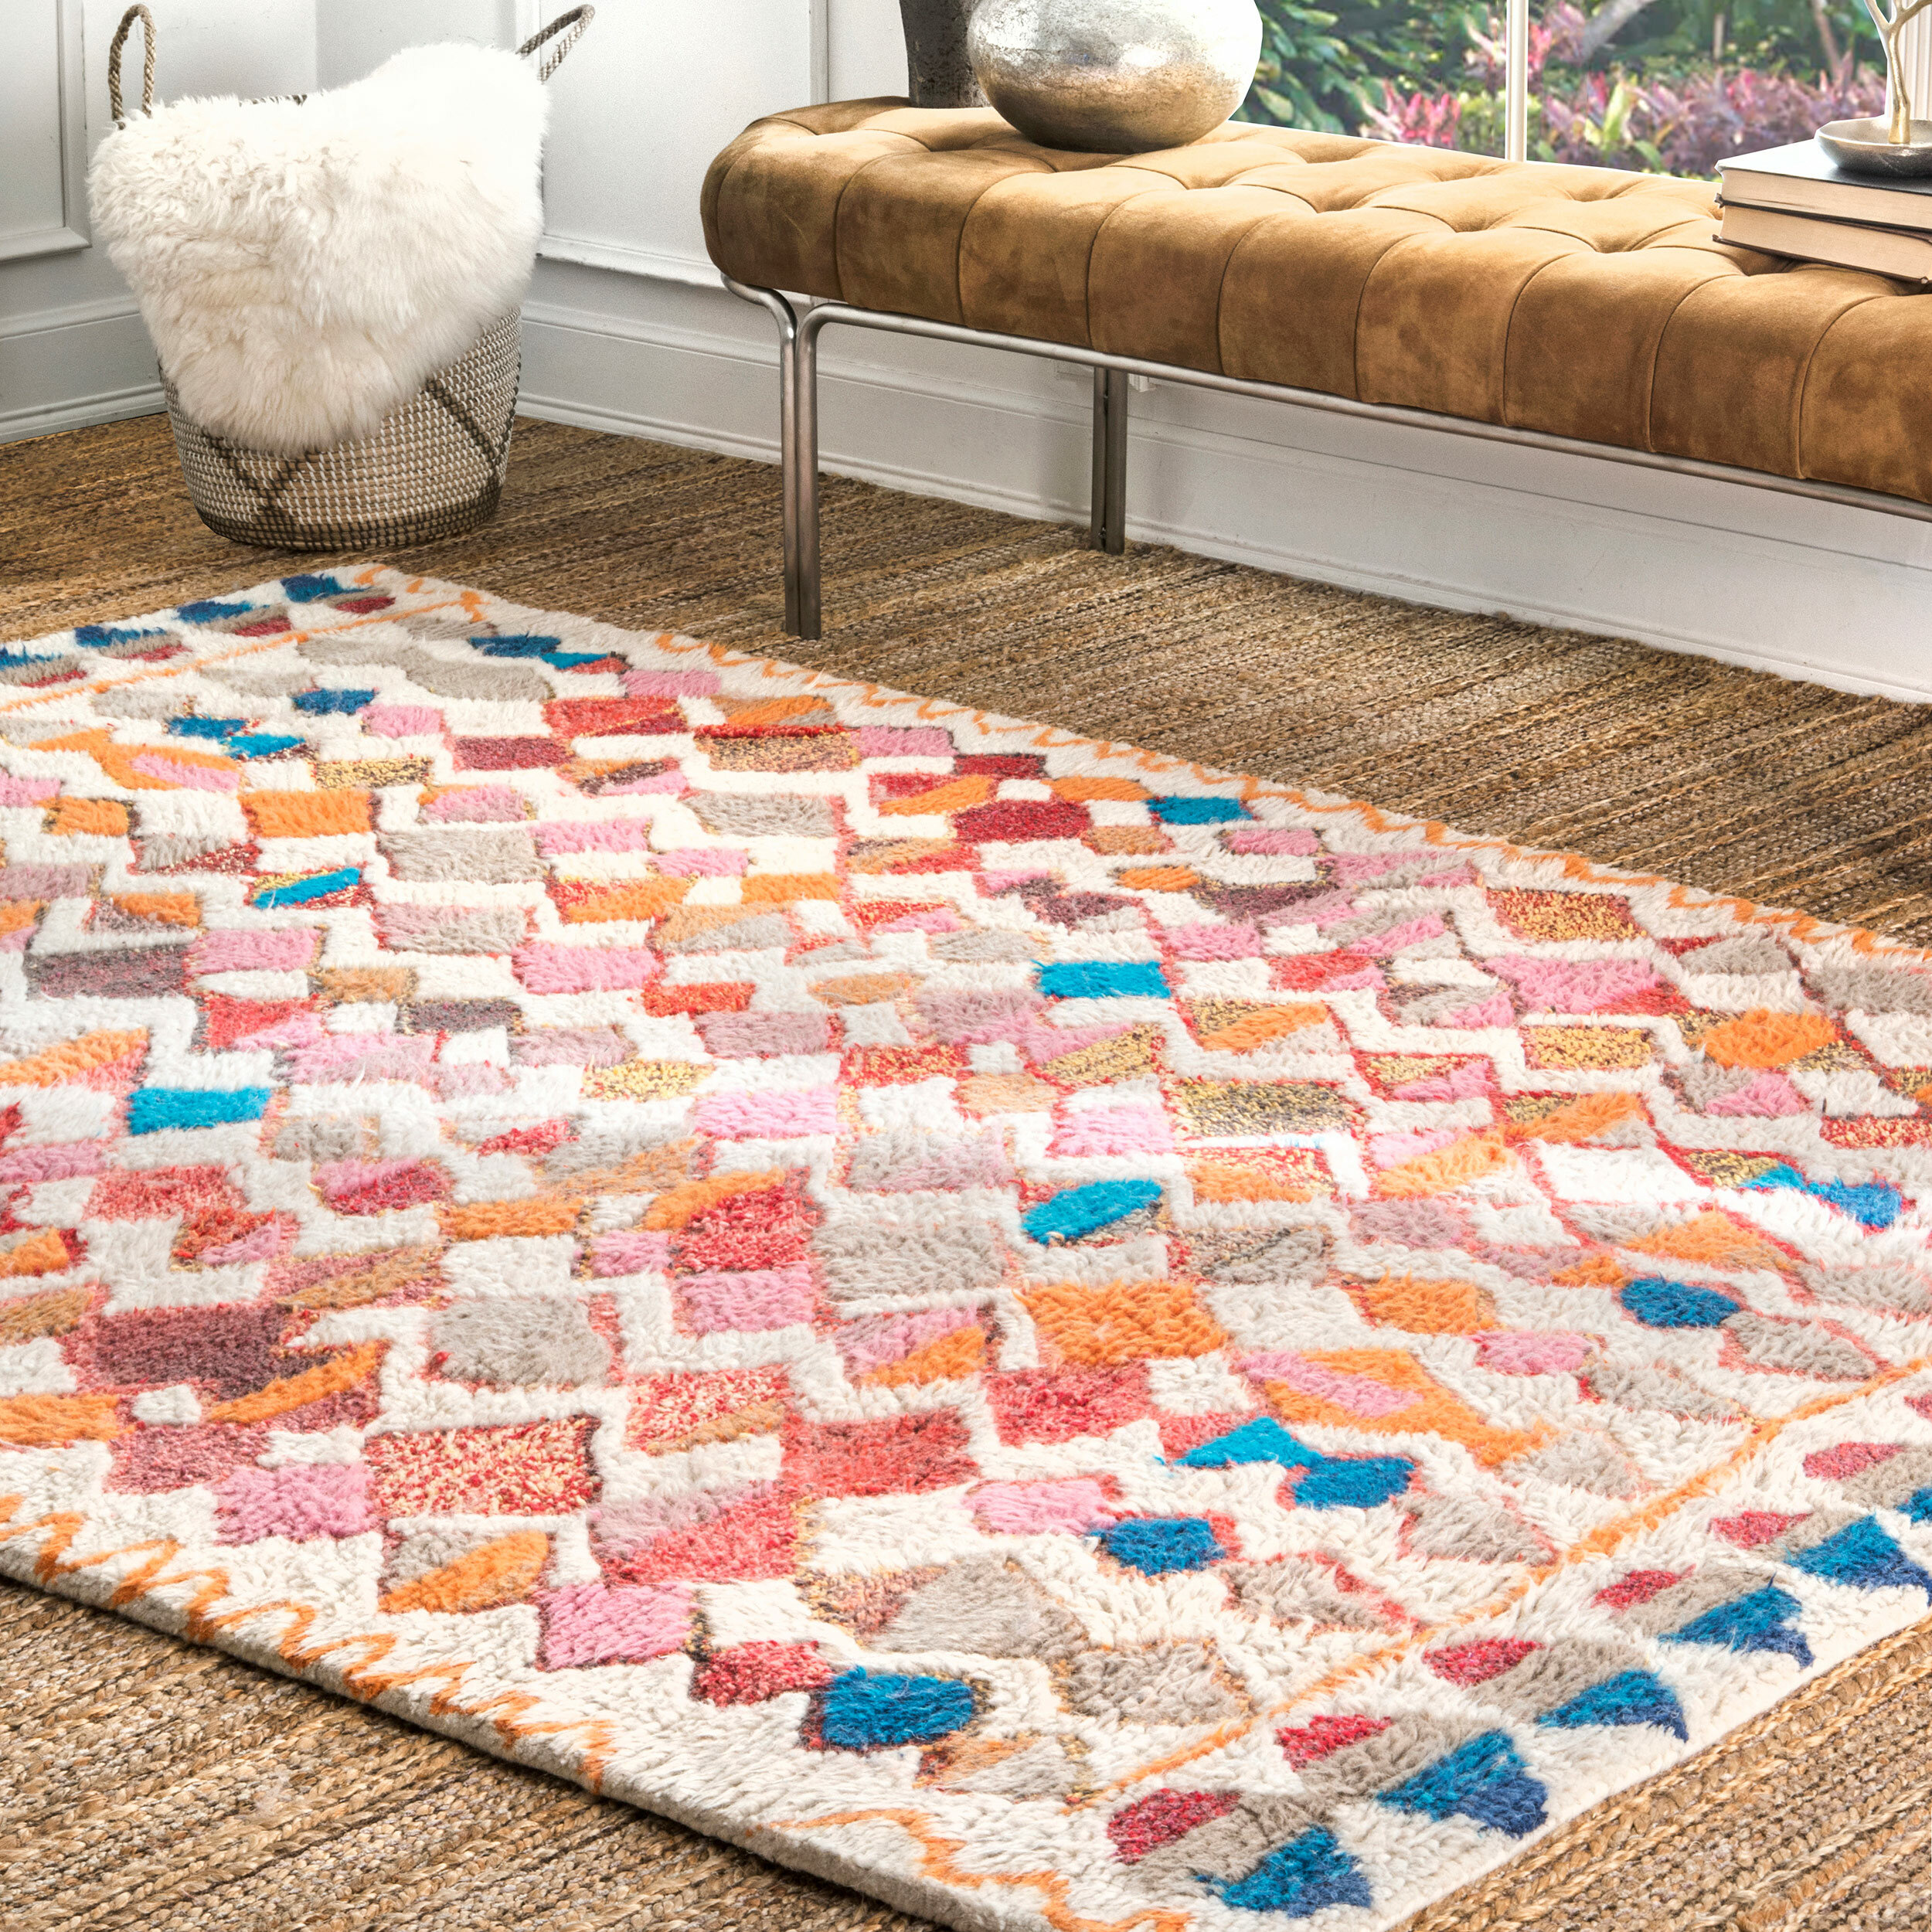 The Tufted Rug is Trending